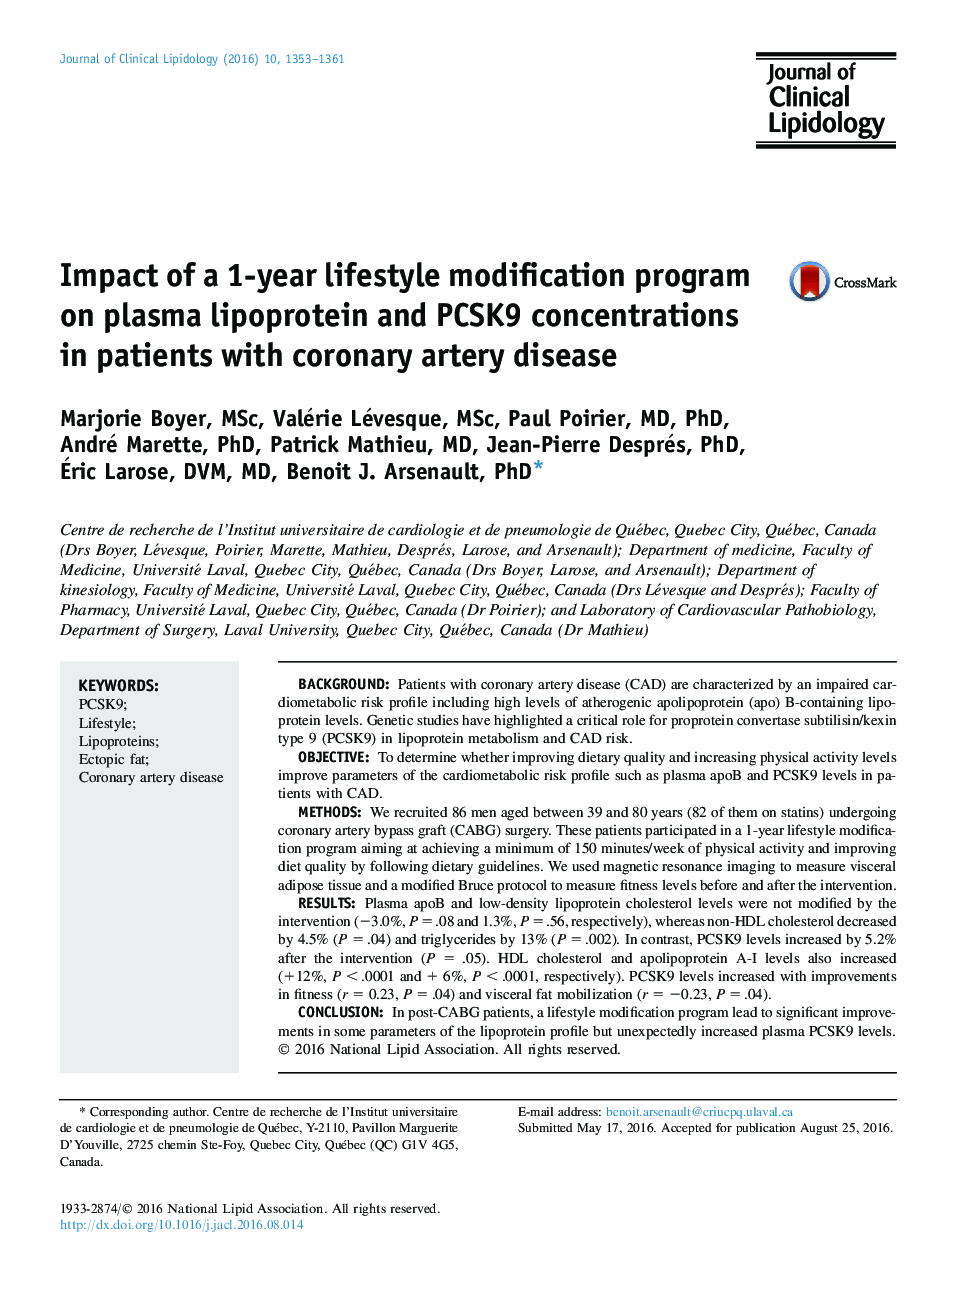 Impact of a 1-year lifestyle modification program on plasma lipoprotein and PCSK9 concentrations in patients with coronary artery disease